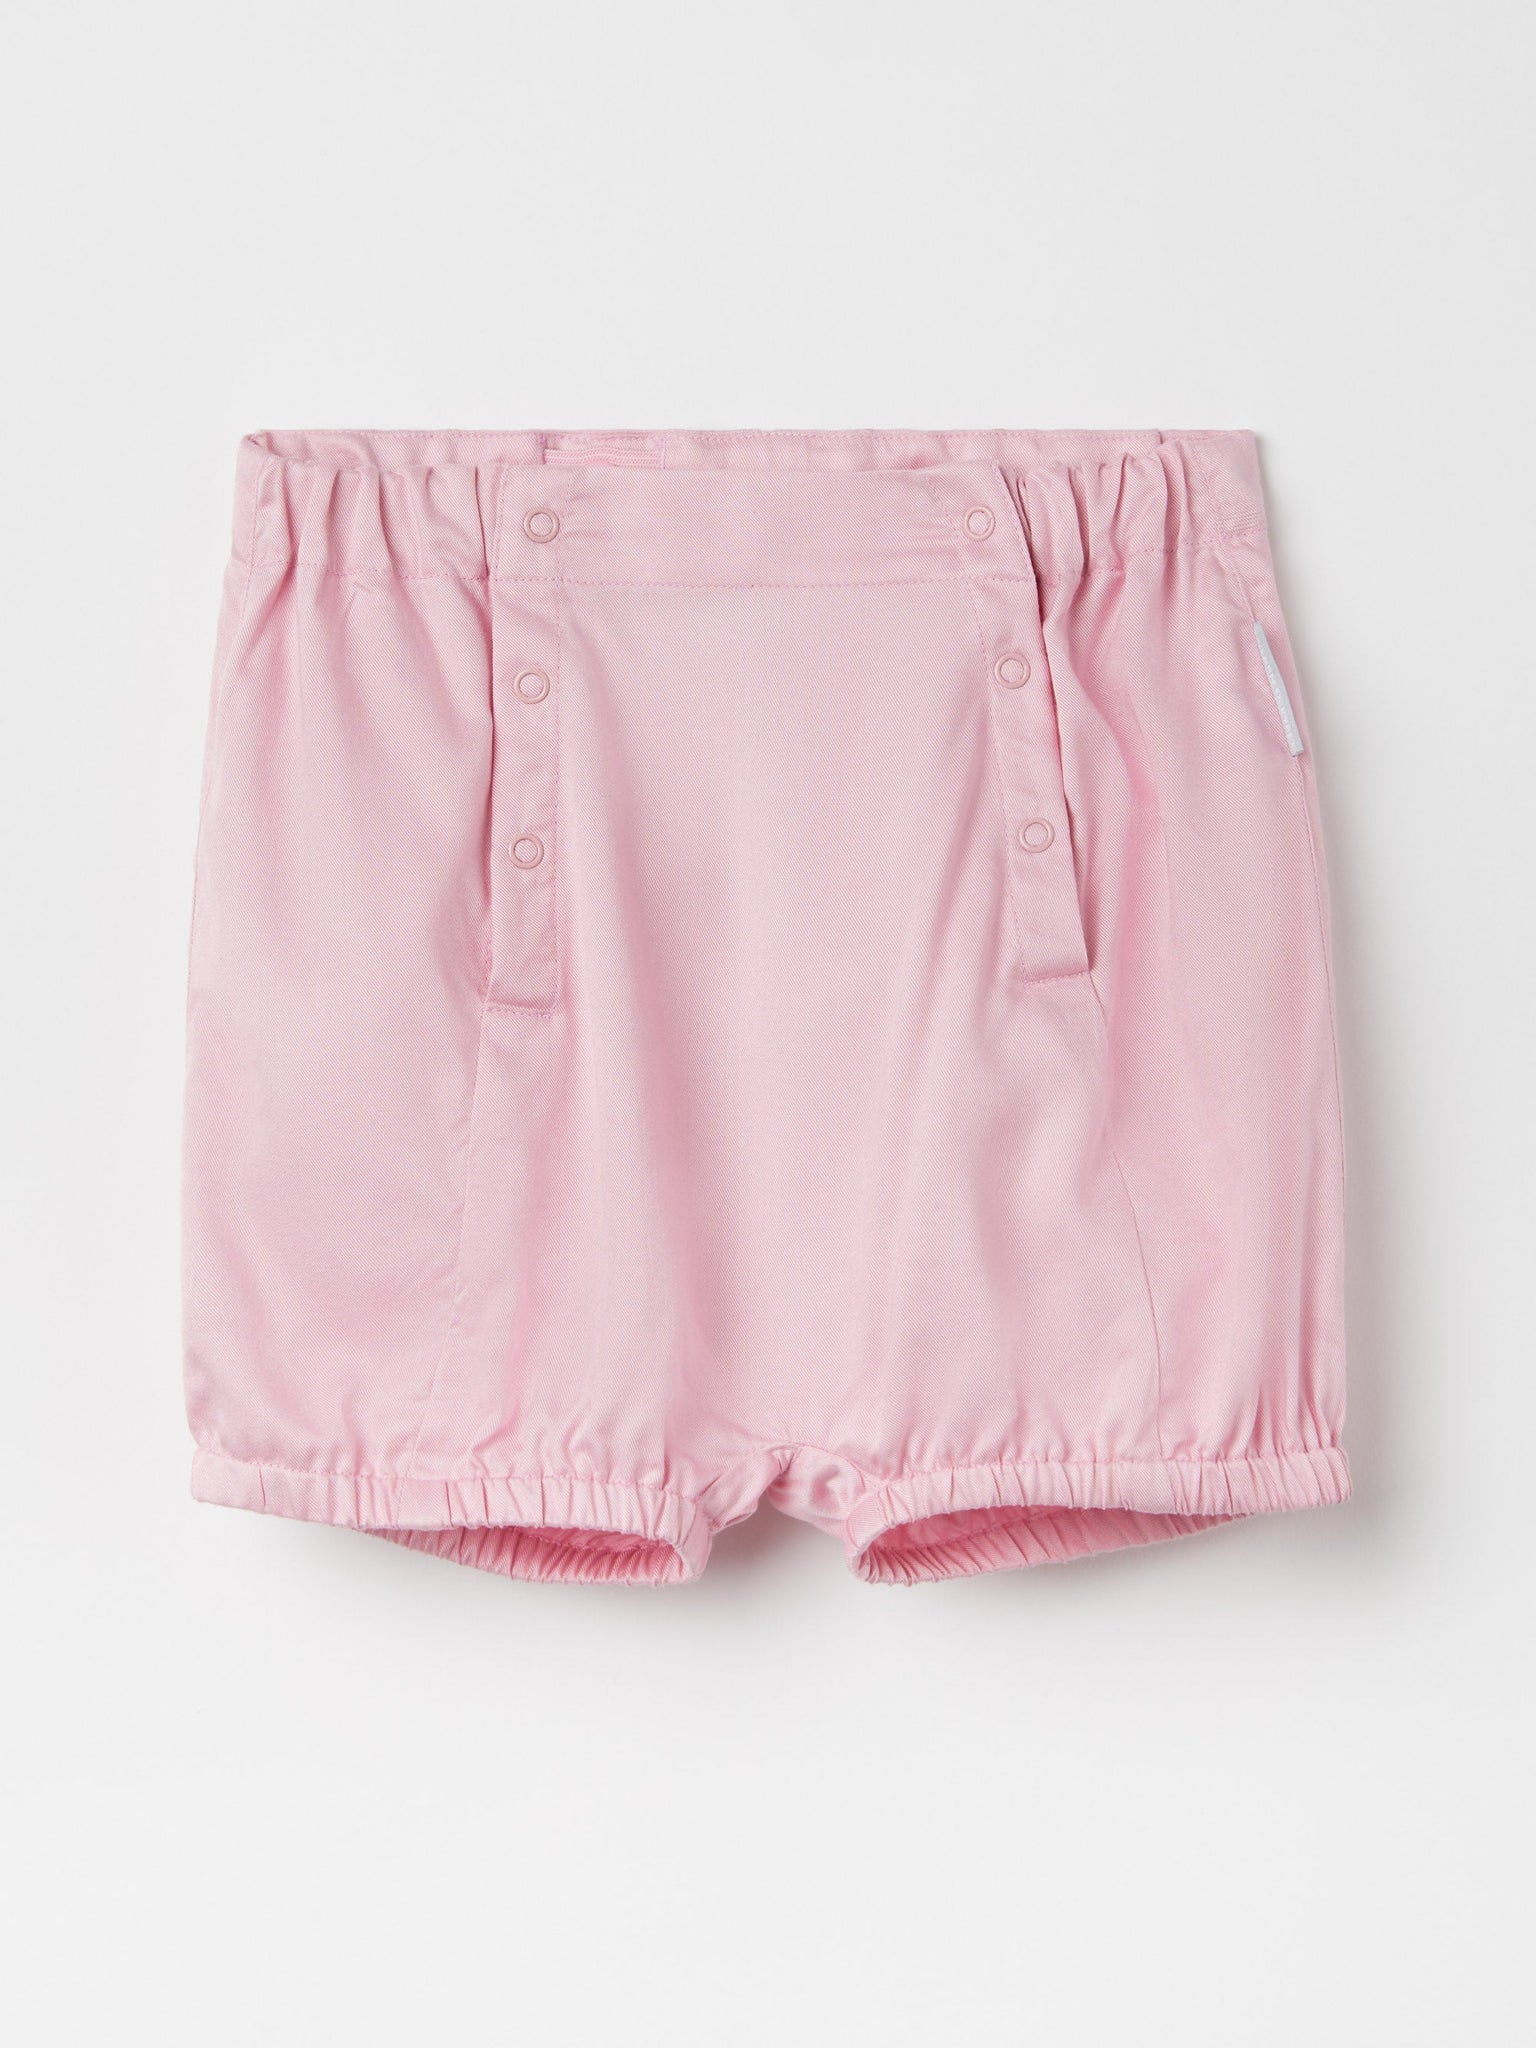 Pretty Pink Cotton Baby Shorts from the Polarn O. Pyret baby collection. Clothes made using sustainably sourced materials.